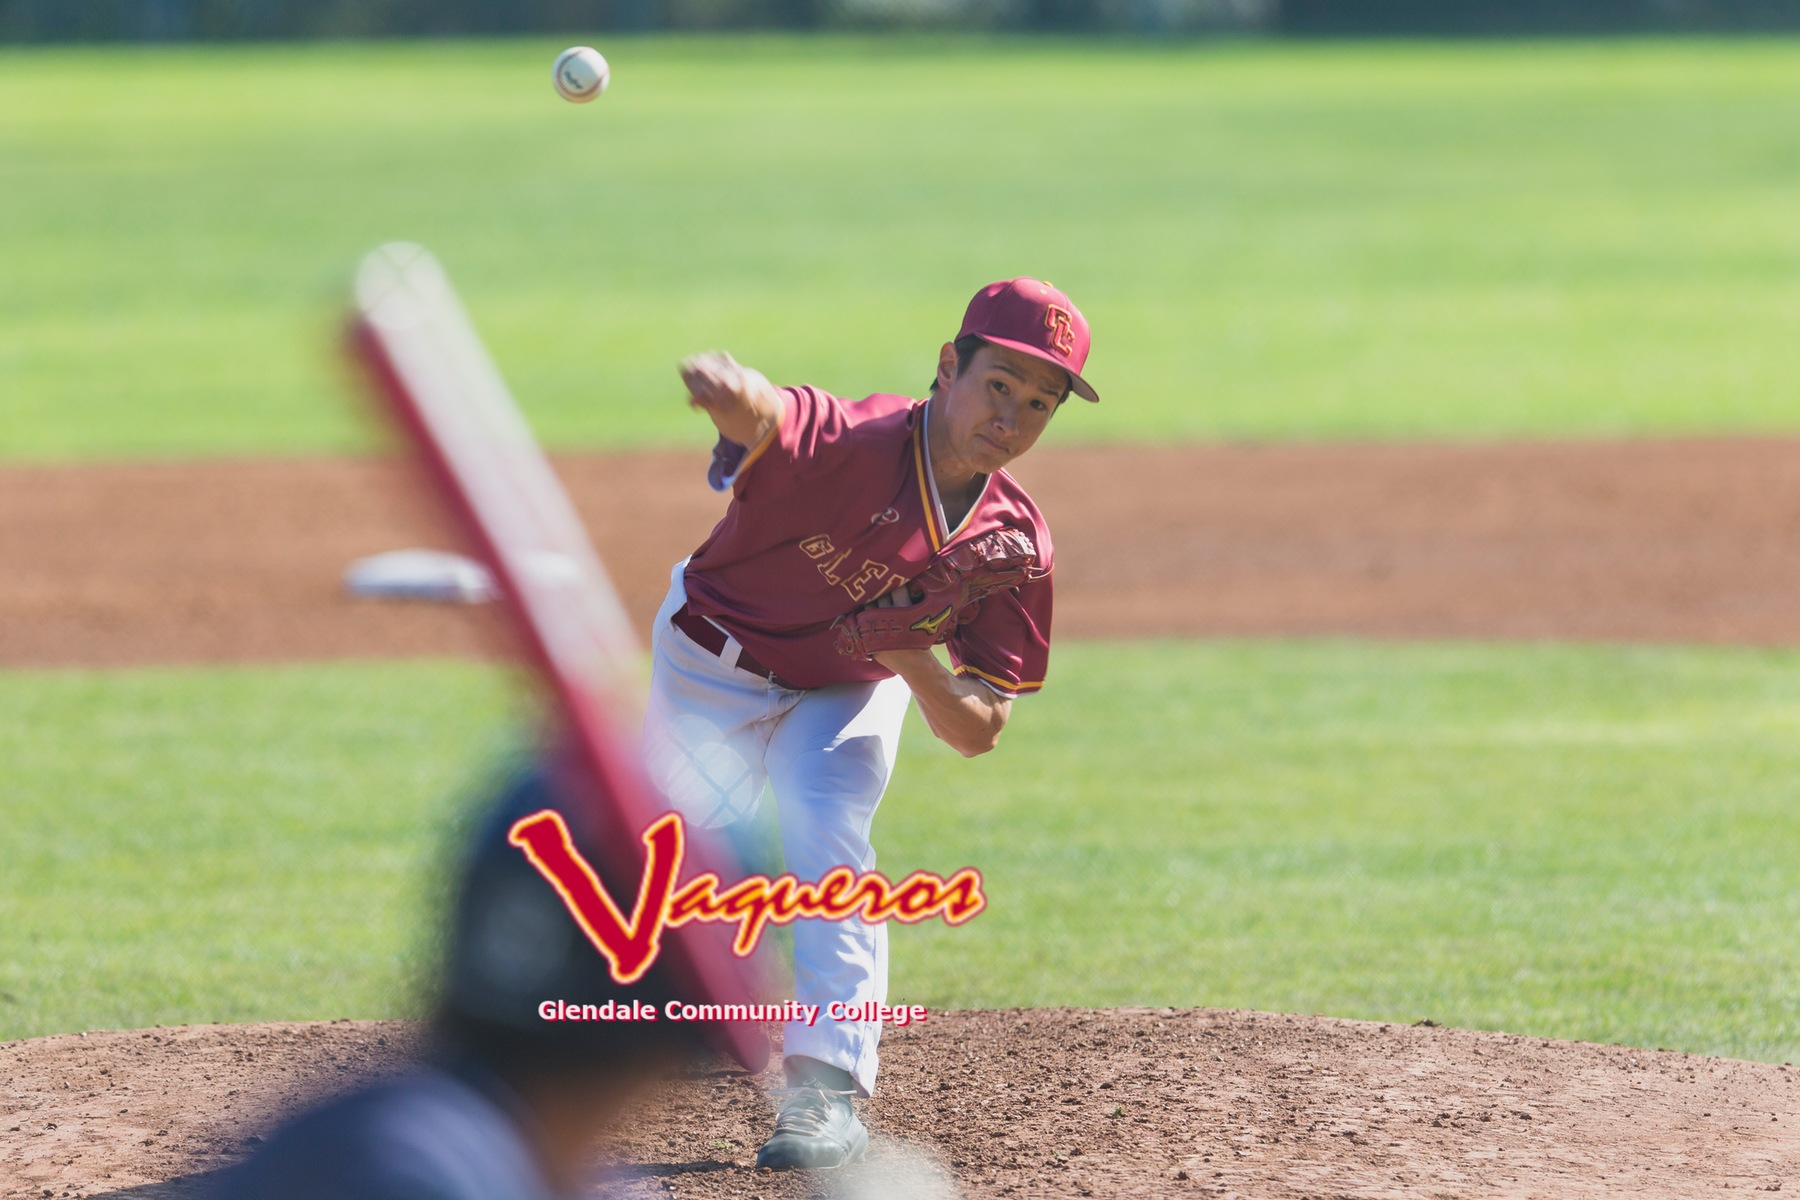 Glendale beats West L.A. 6-2 to improve to 2-1 in WSC play